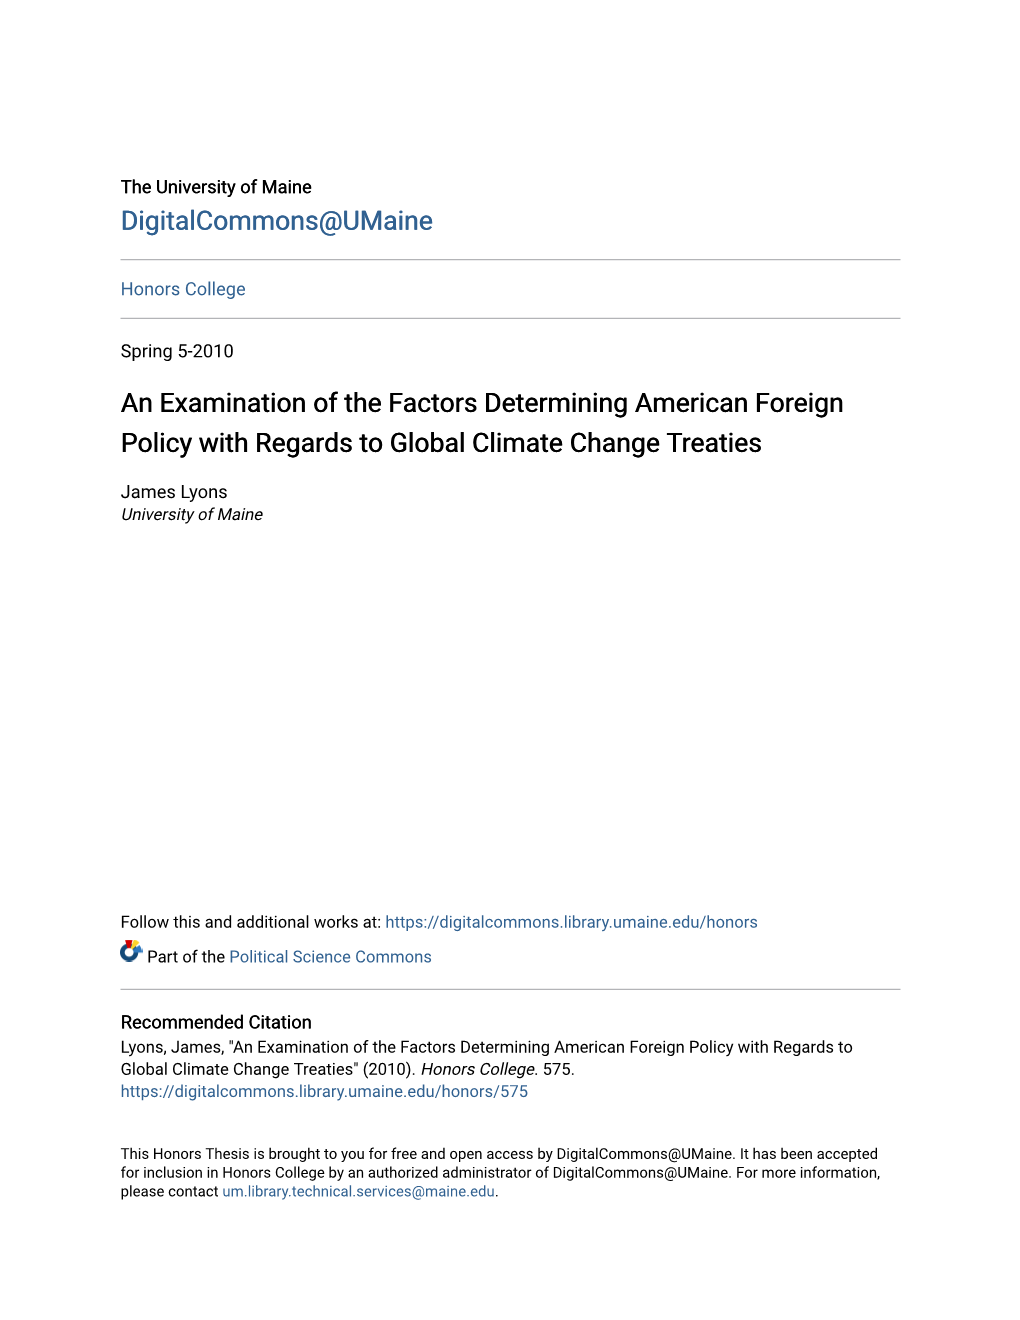 An Examination of the Factors Determining American Foreign Policy with Regards to Global Climate Change Treaties